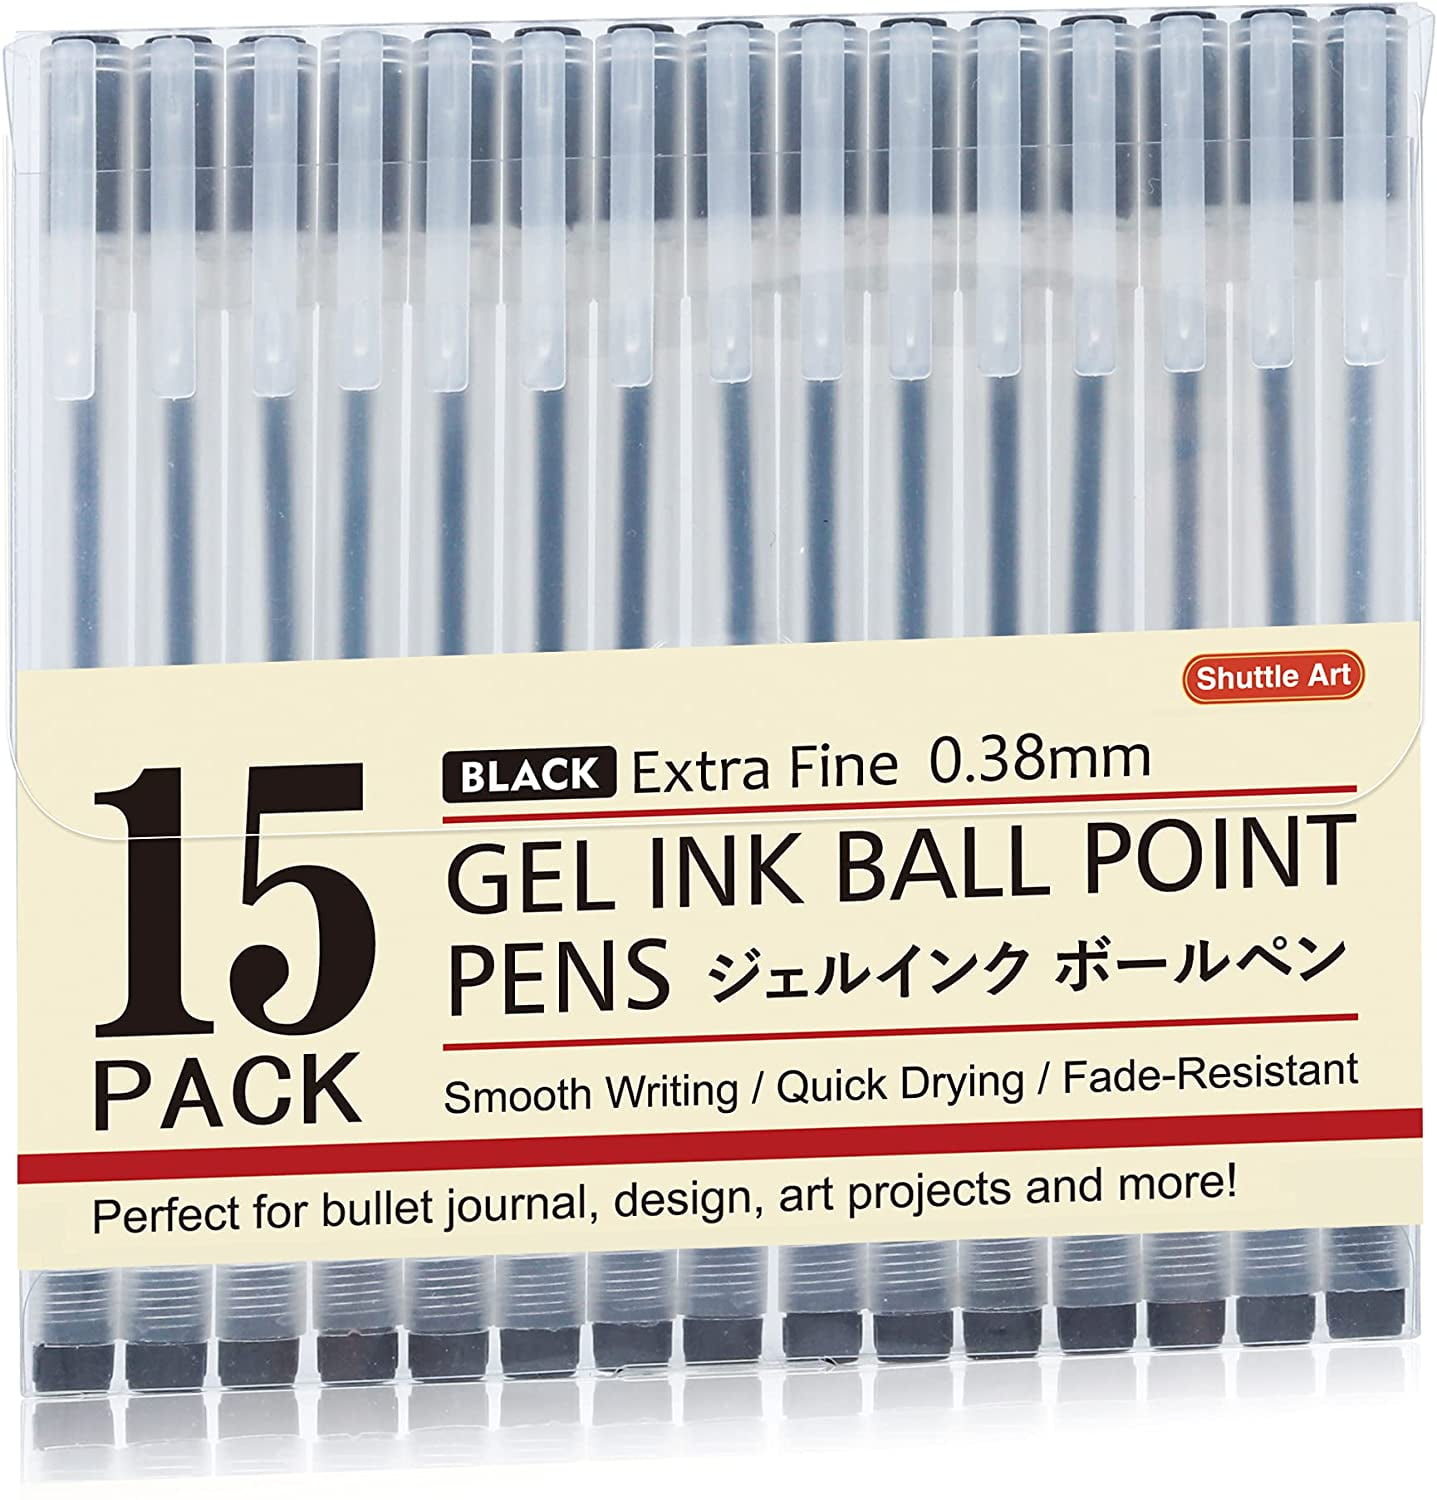 Gel Ink Ball Point Pens, Shuttle Art 15 Pack Black Japanese Style Pens,  0.38mm Extra-Fine Ballpoint Pens for Home, School and Office 